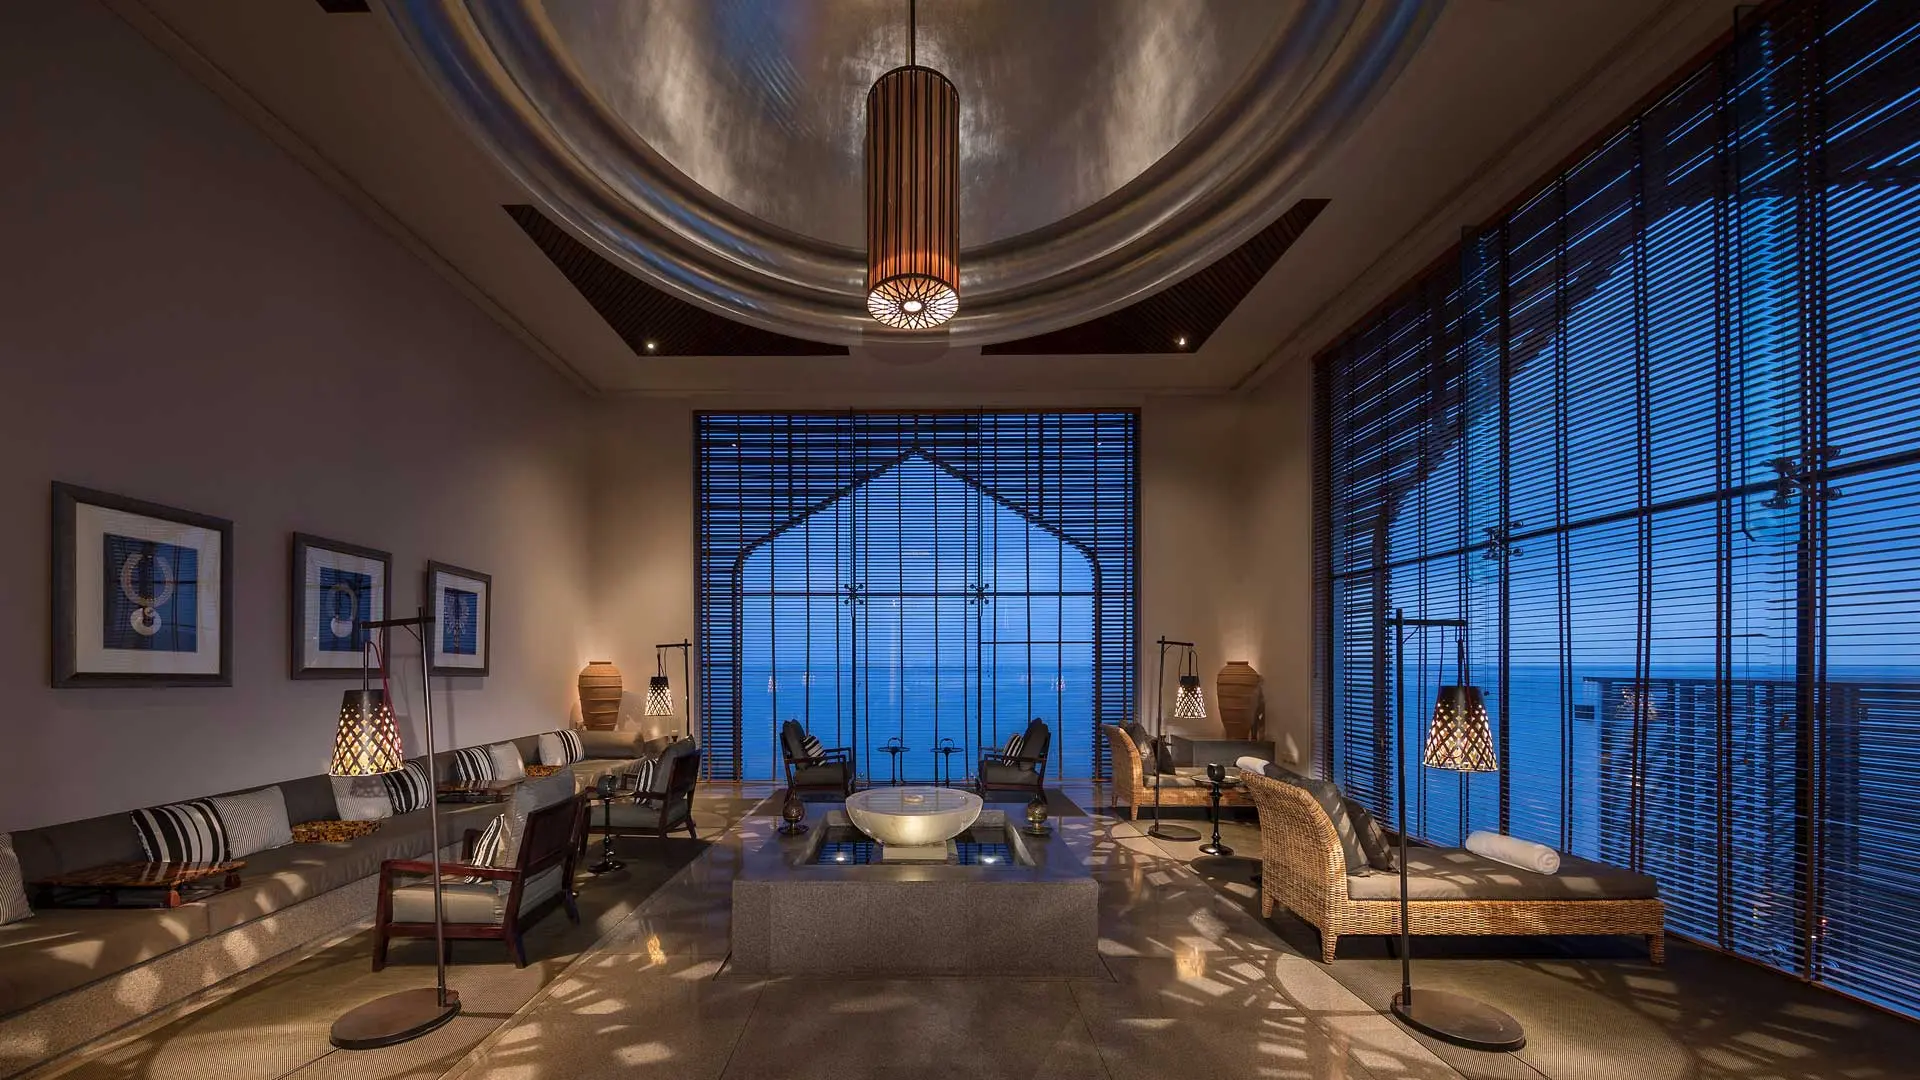 Hotel review Service & Facilities' - The Chedi Muscat - 7